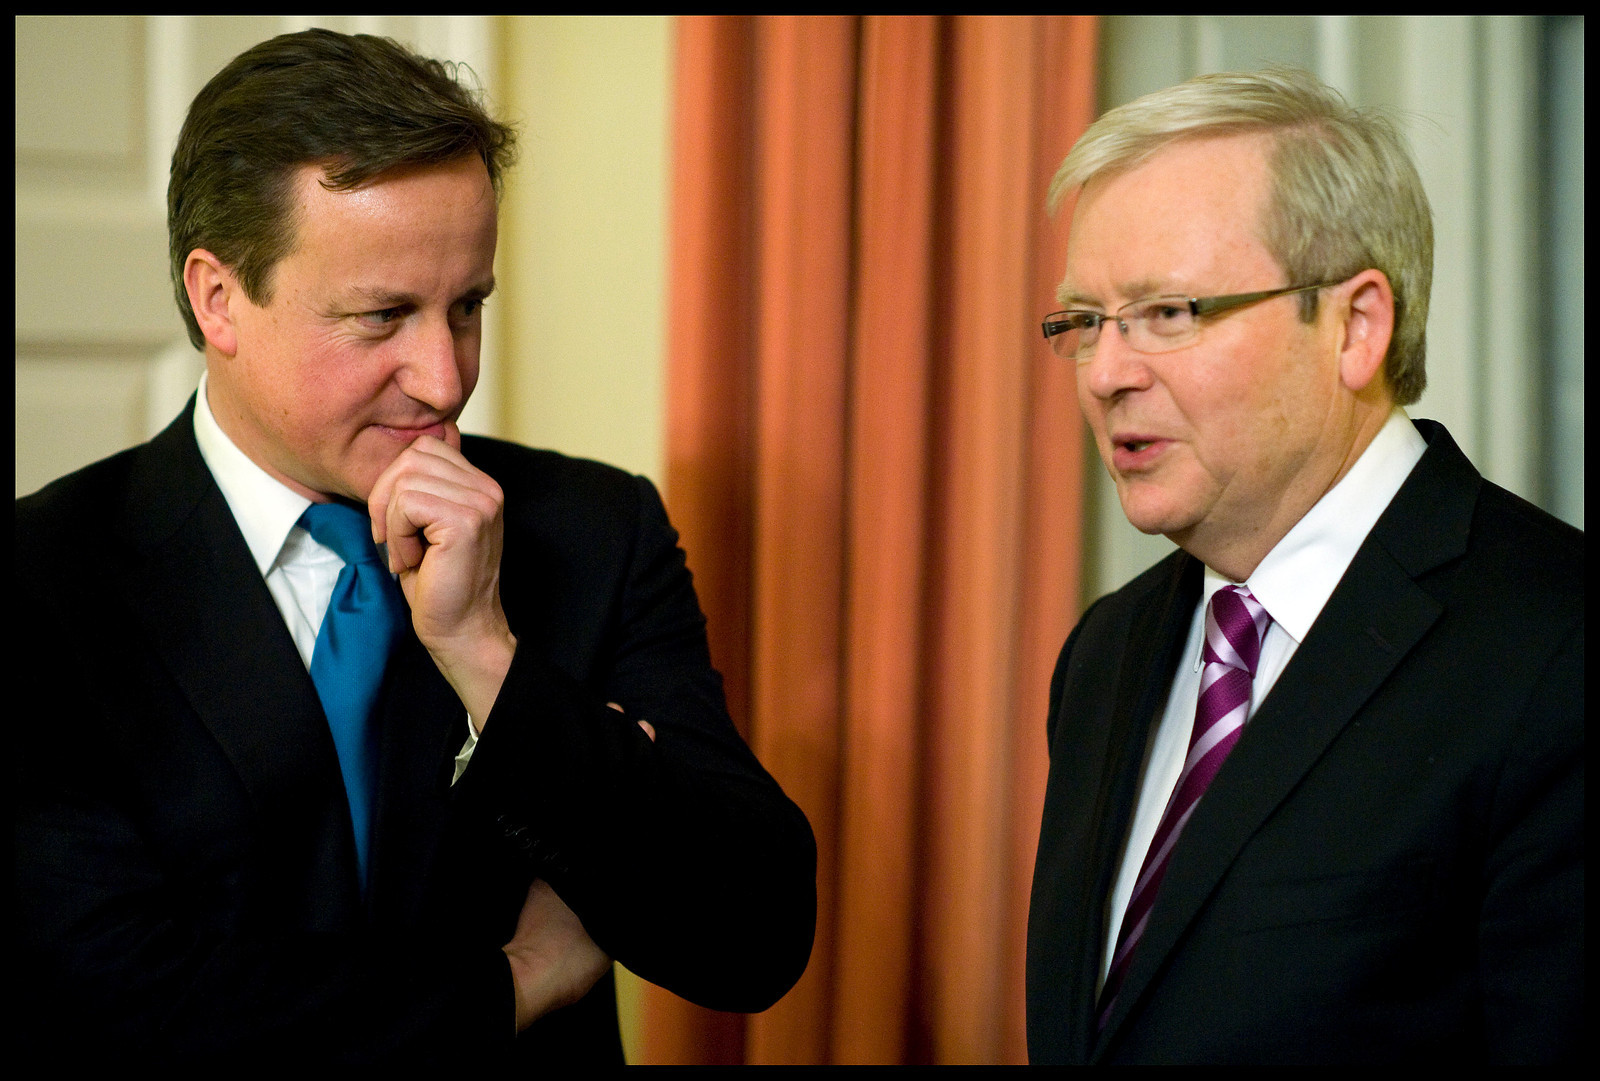 Then-Foreign Minister Kevin Rudd with UK PM David Cameron, 2012 (Credit: foreignminister.gov.au)